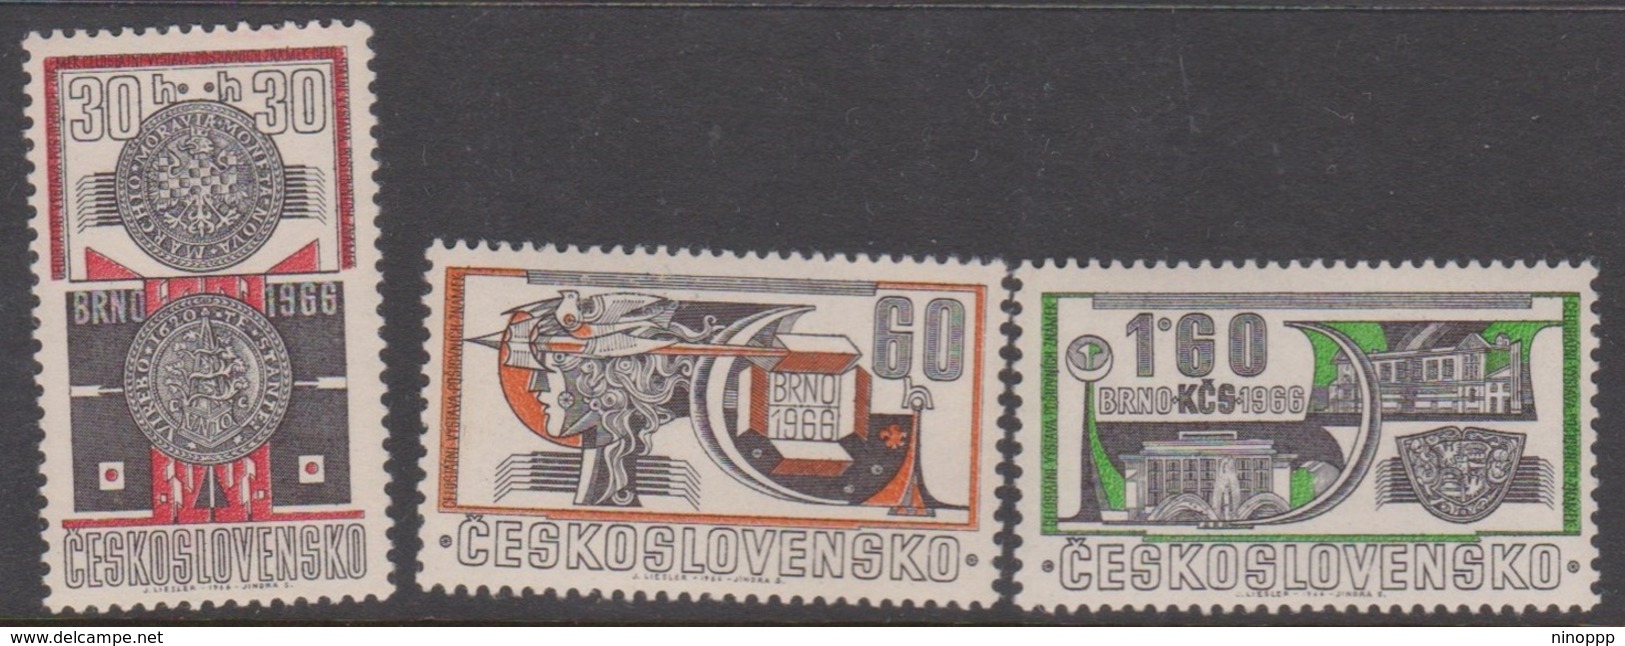 Czechoslovakia SG 1602-1604 1966 Brno Stamp Exhibition, Mint Never Hinged - Unused Stamps